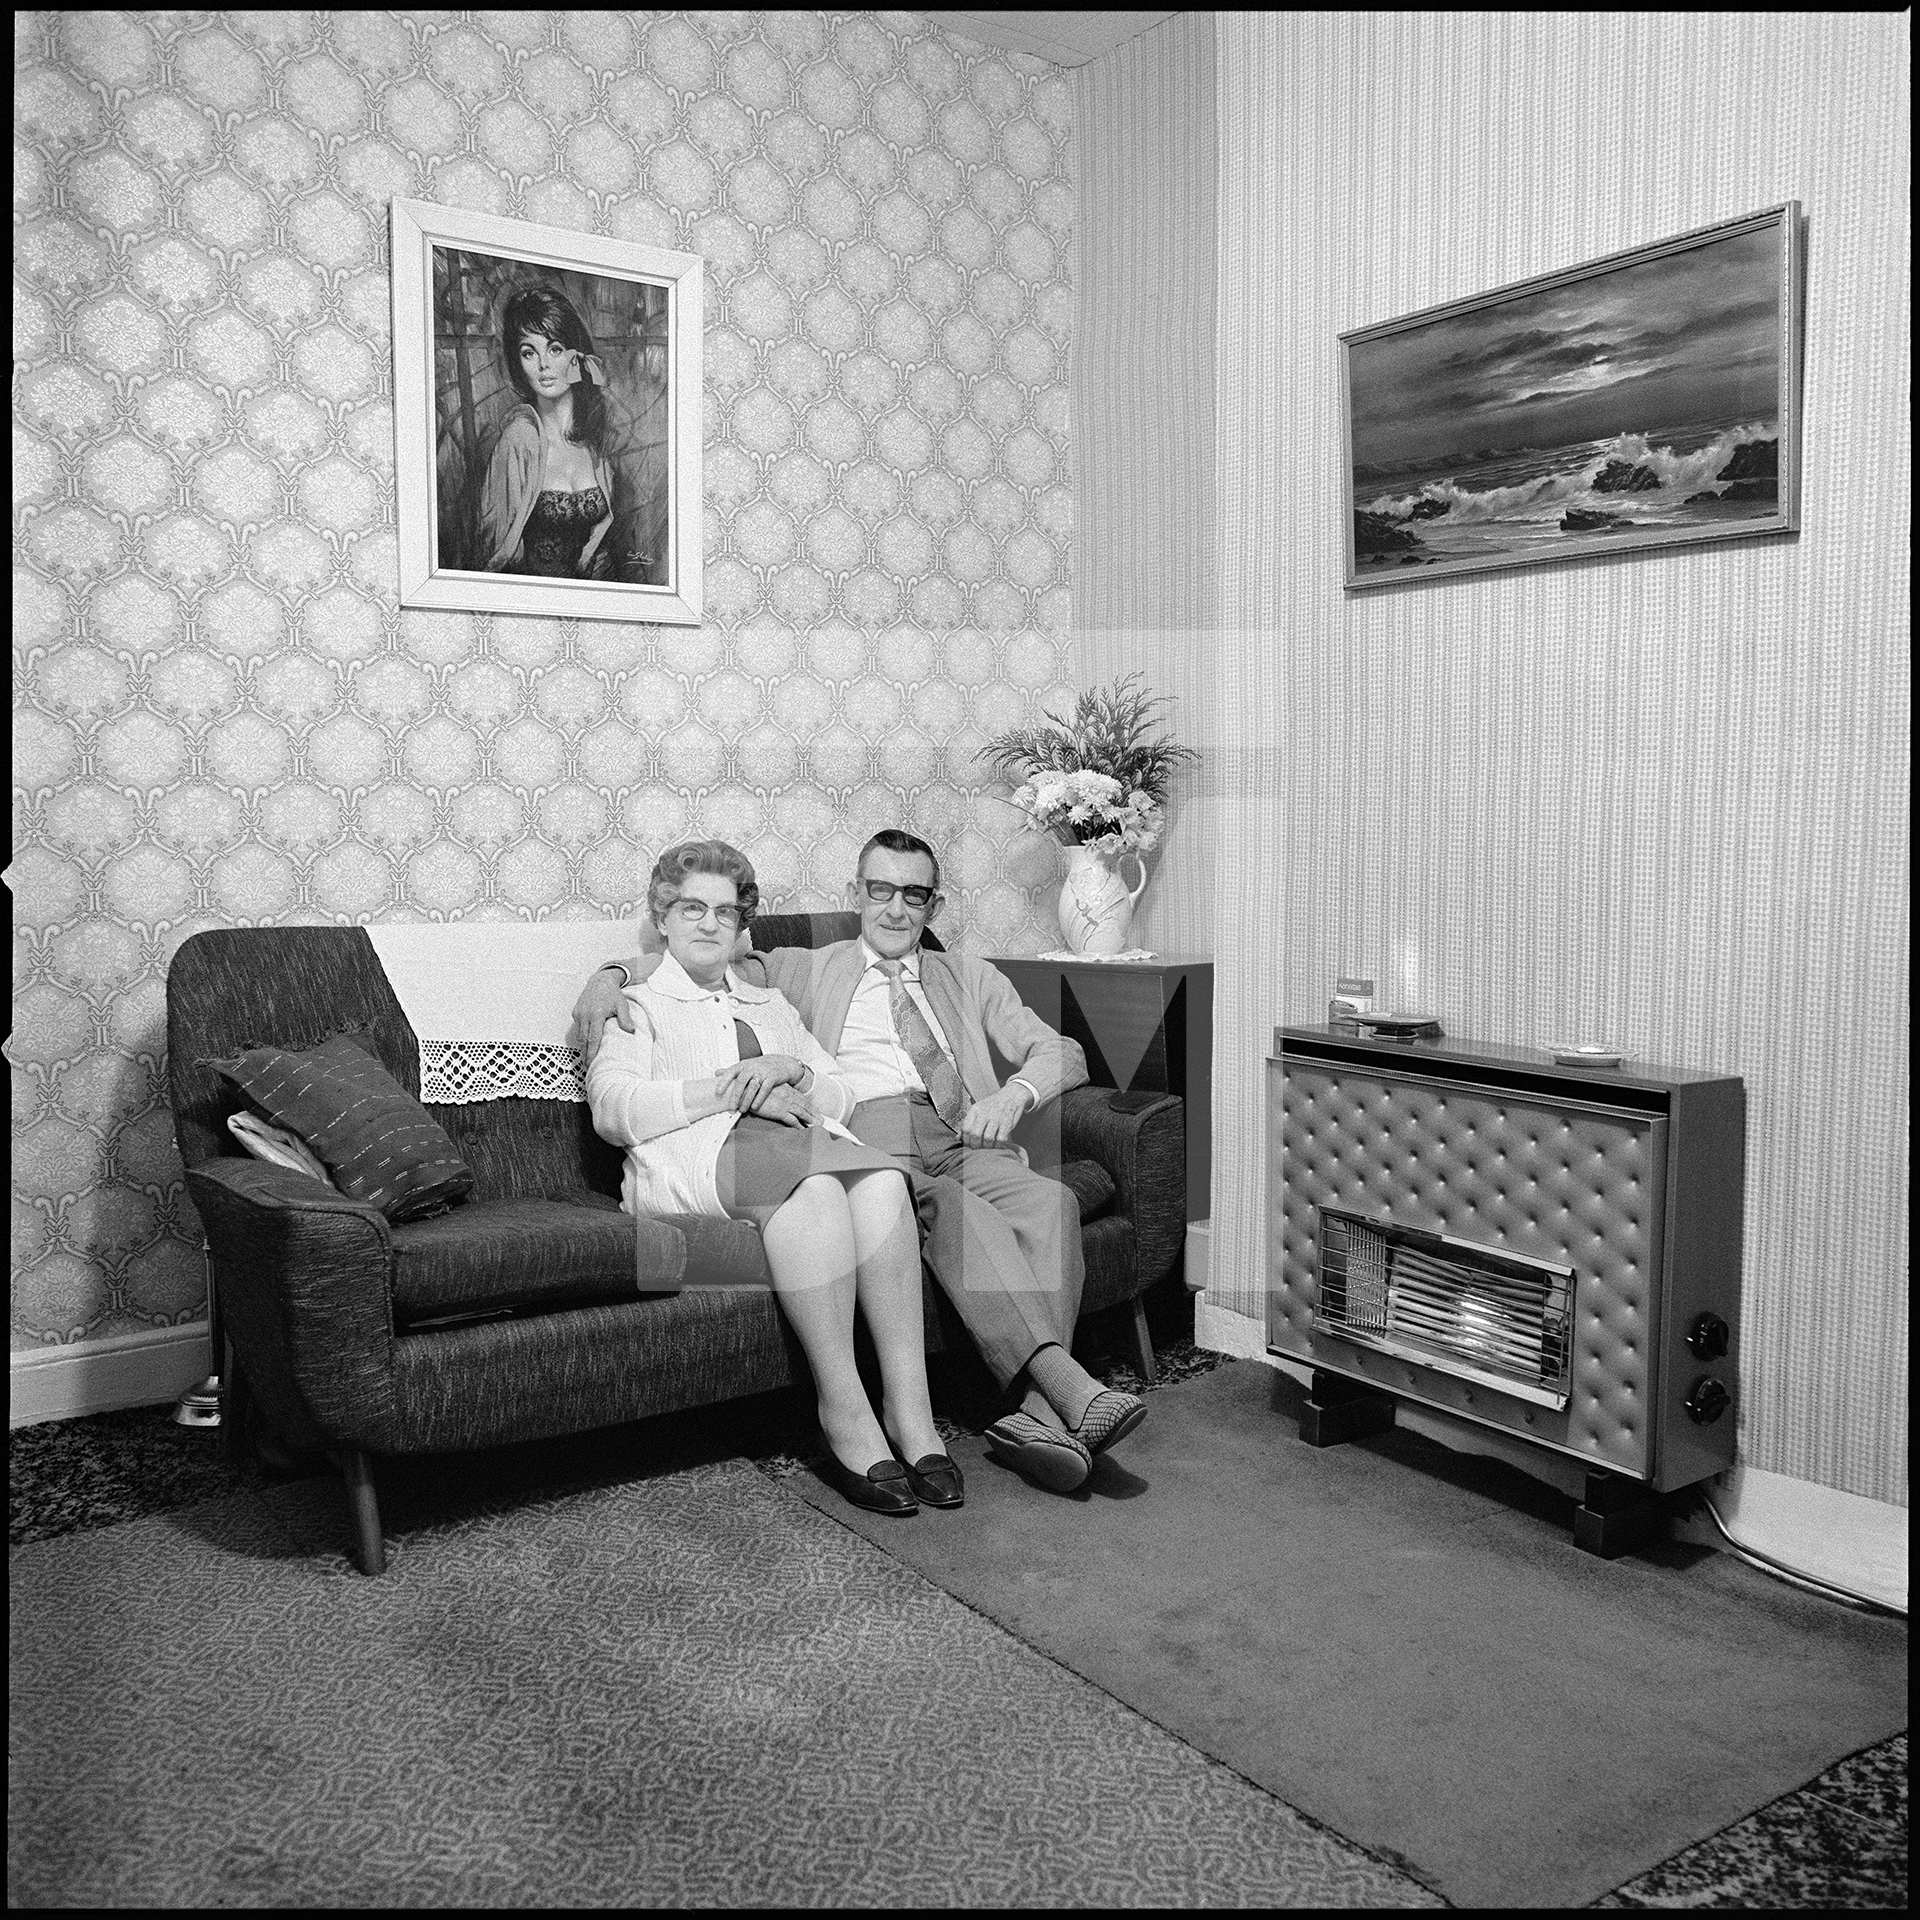 Annie and Herbert Steele. (Identified as his grandparents by Tim Curtis who explained in May 2015 that Annie and Herbert had lived at no.3 June Street.) Residents of June Street, Salford. 1973 by Daniel Meadows